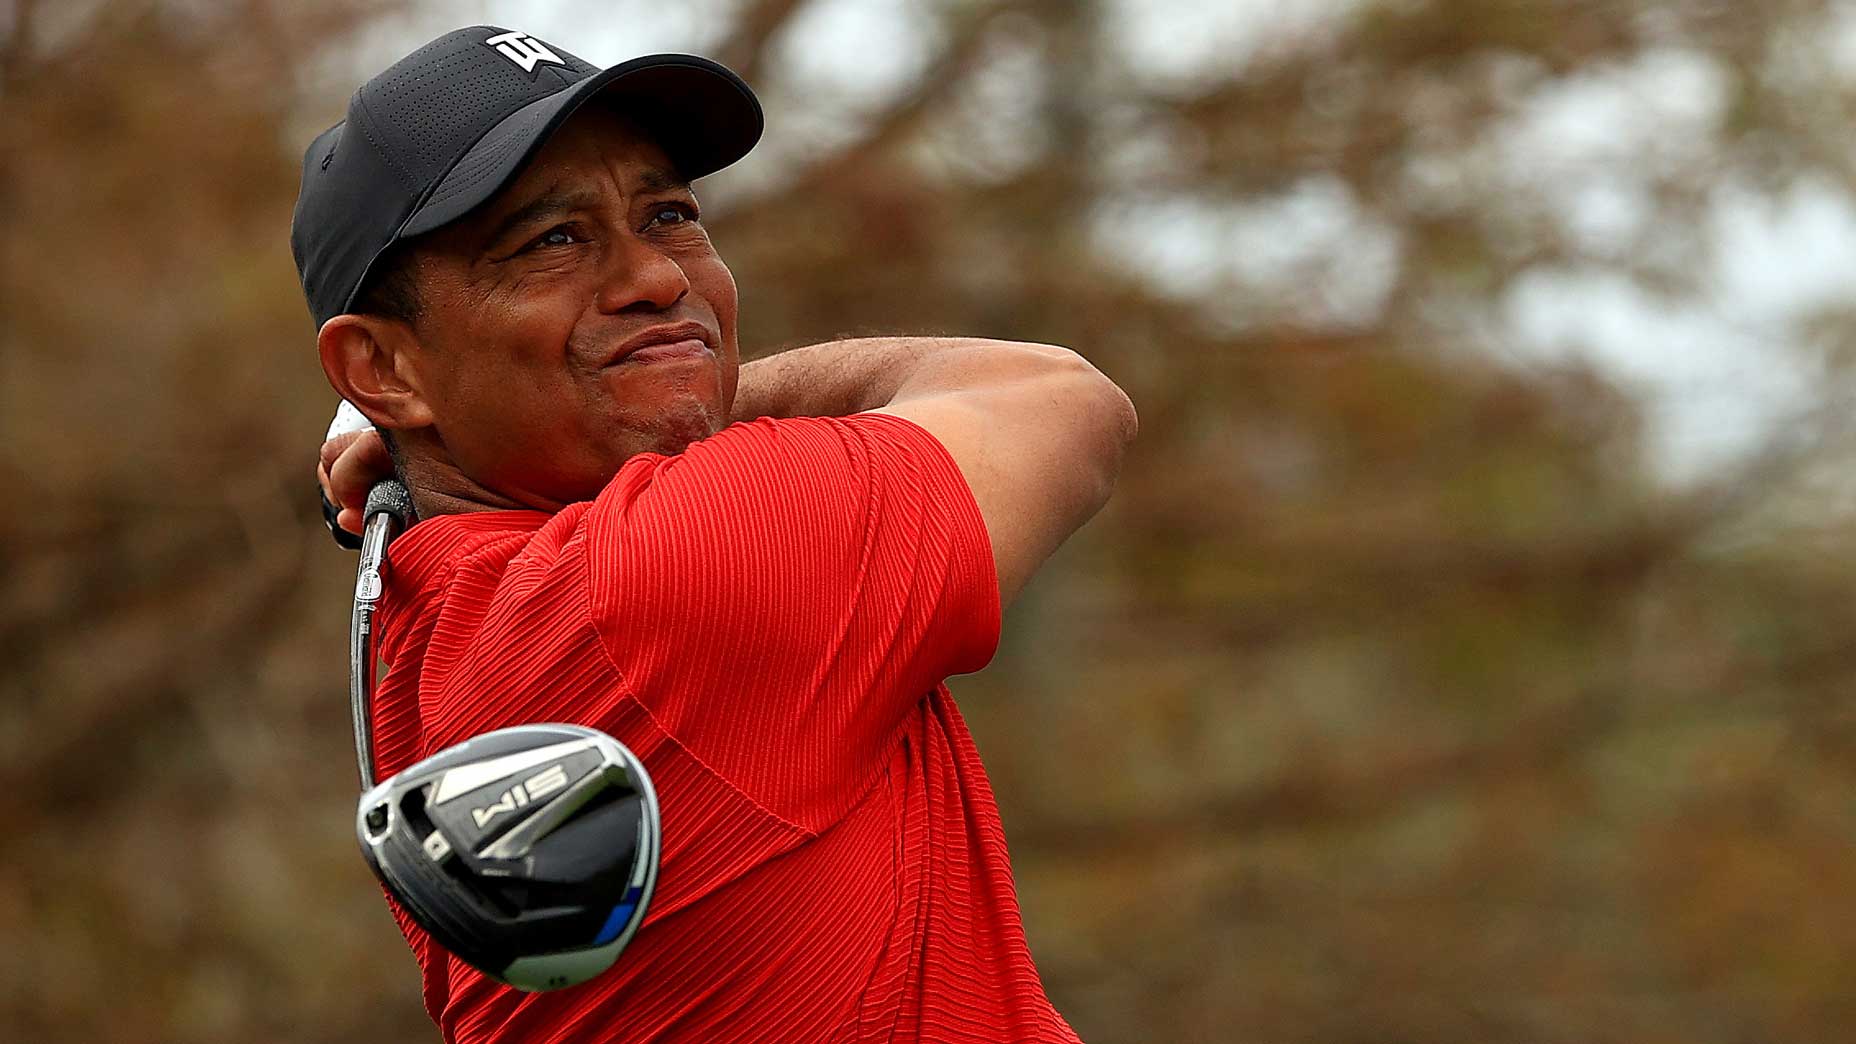 BREAKING: Tiger Woods Suffers Multiple Leg Injuries In Single-car Accident